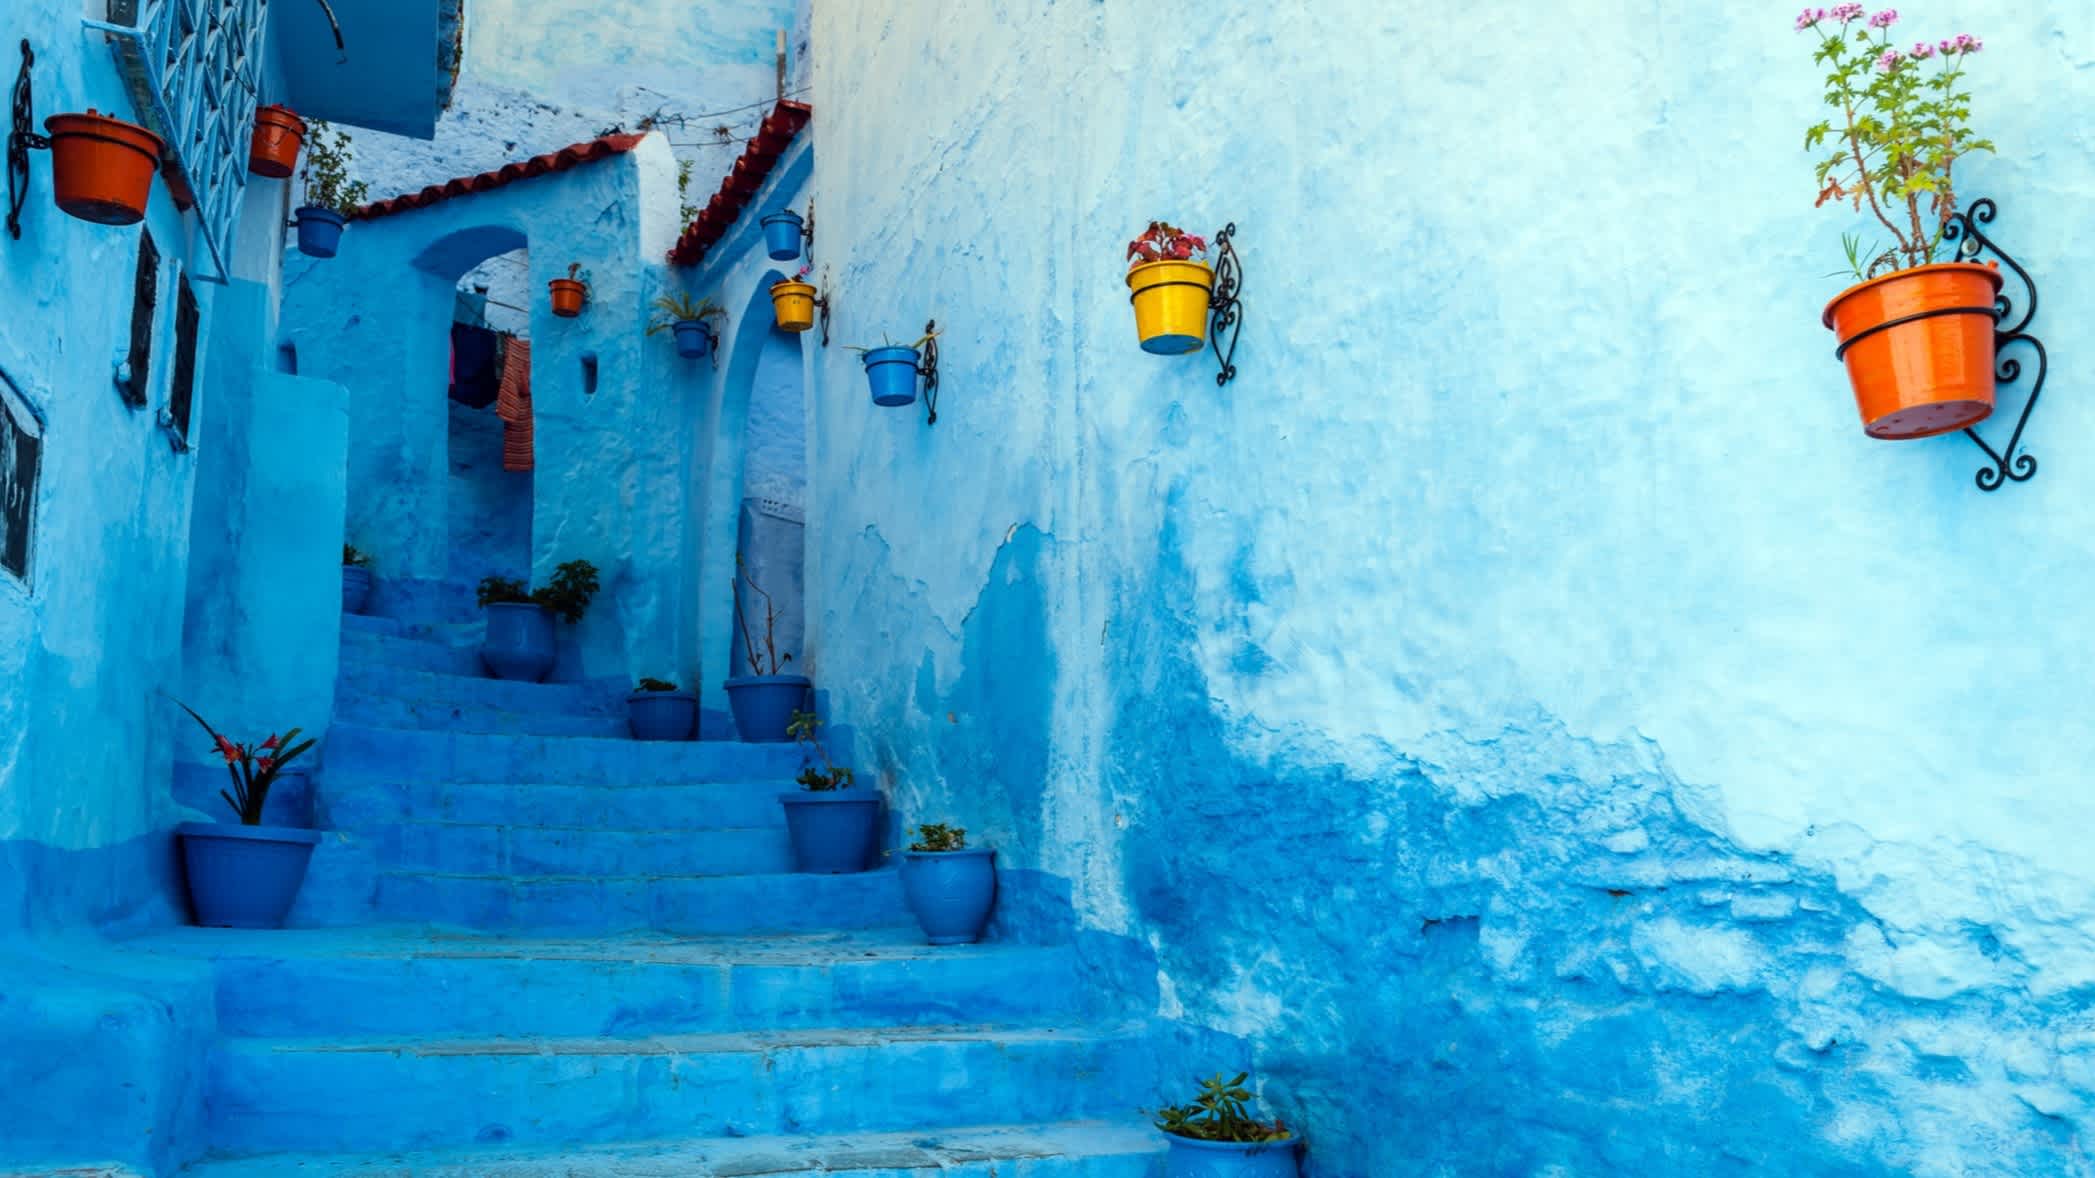 The beautiful blue town of Chefchaouen in Morocco